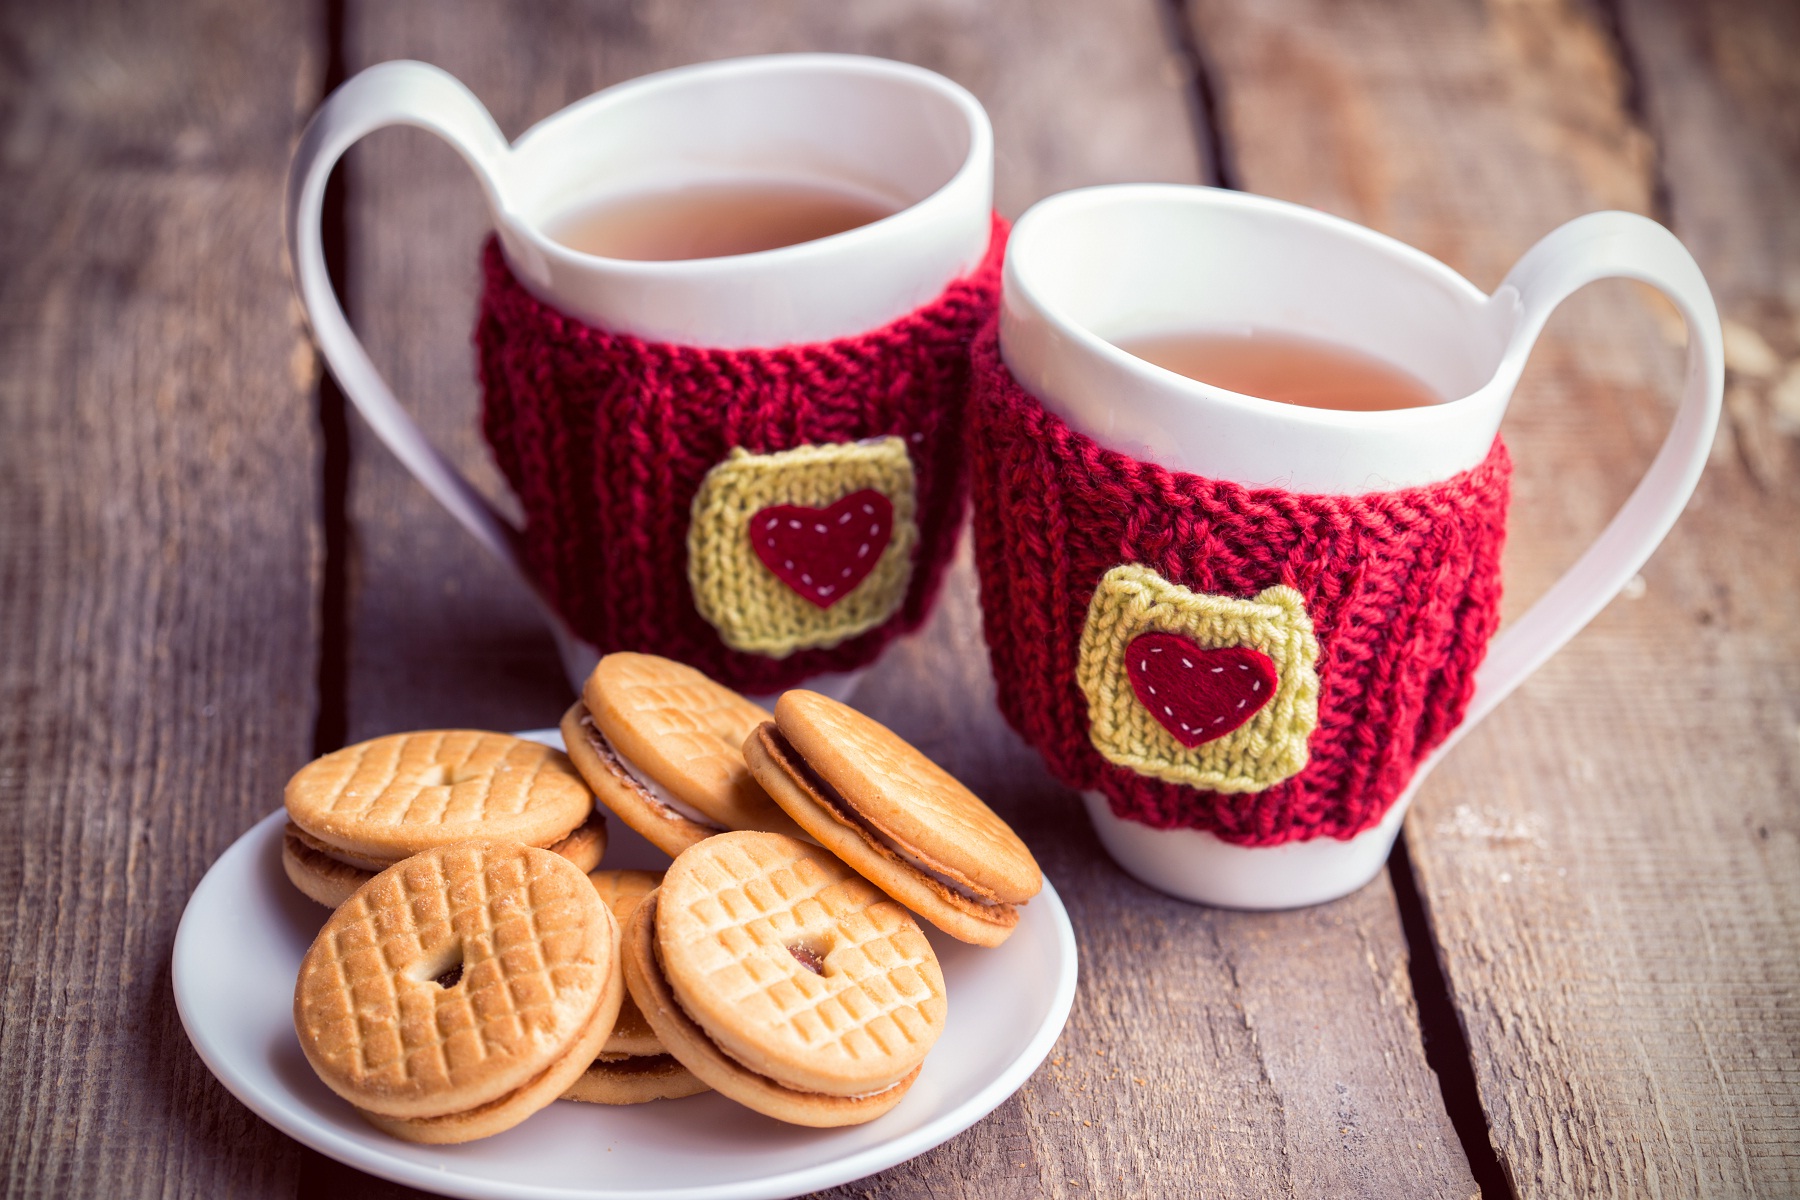 Coffee With Biscuits Wallpaper High Quality